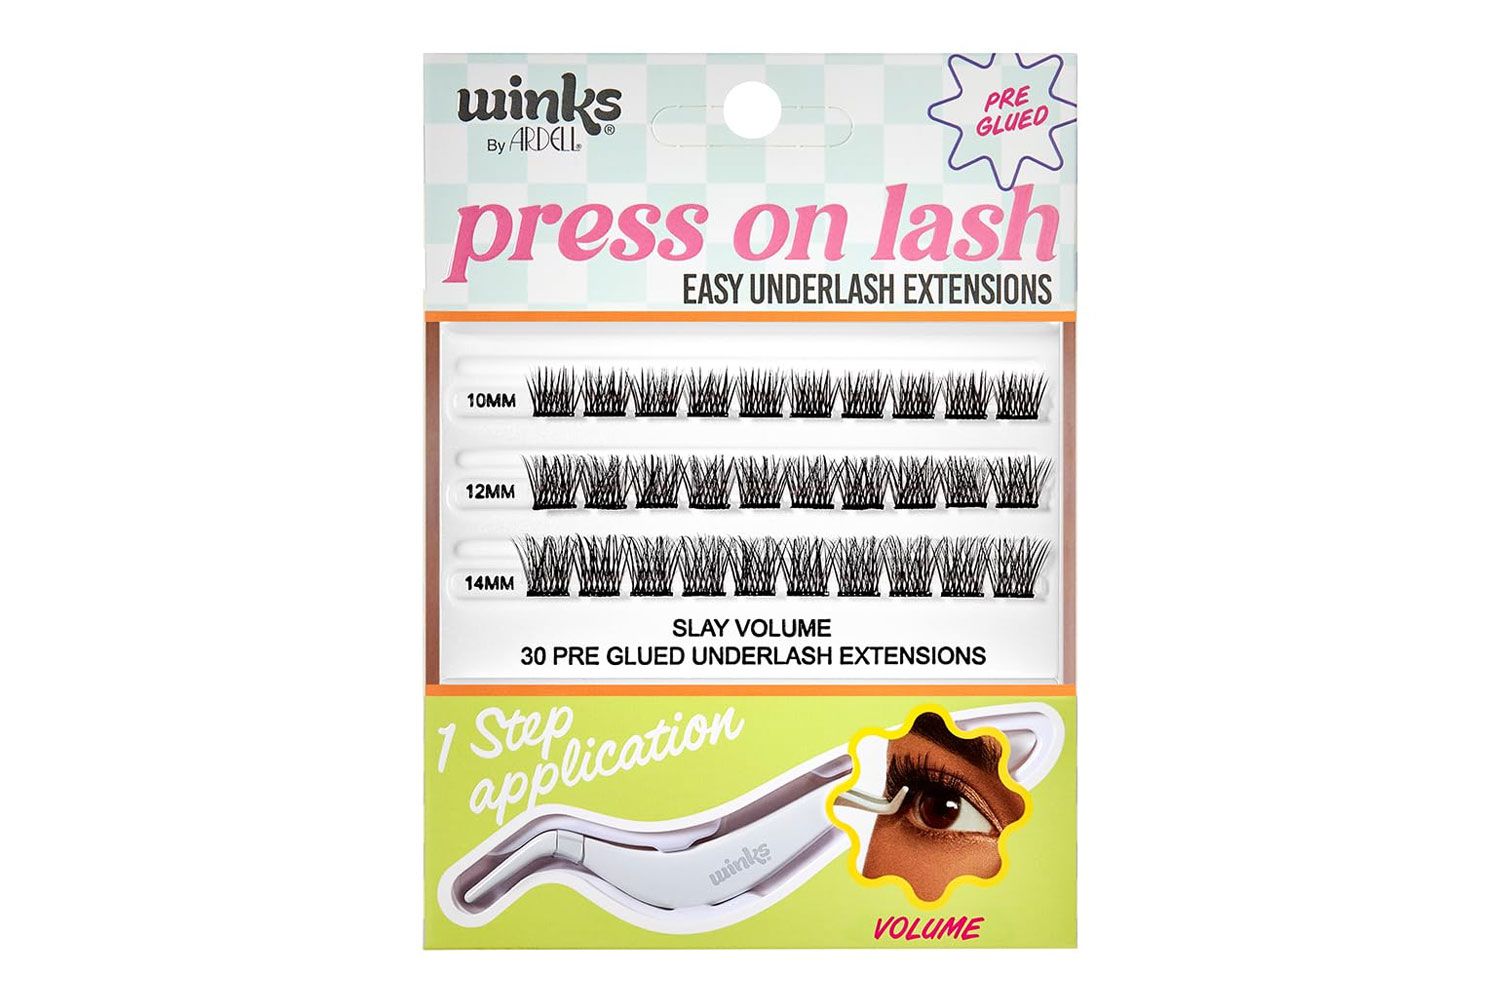 Winks by Ardell Press on Lash